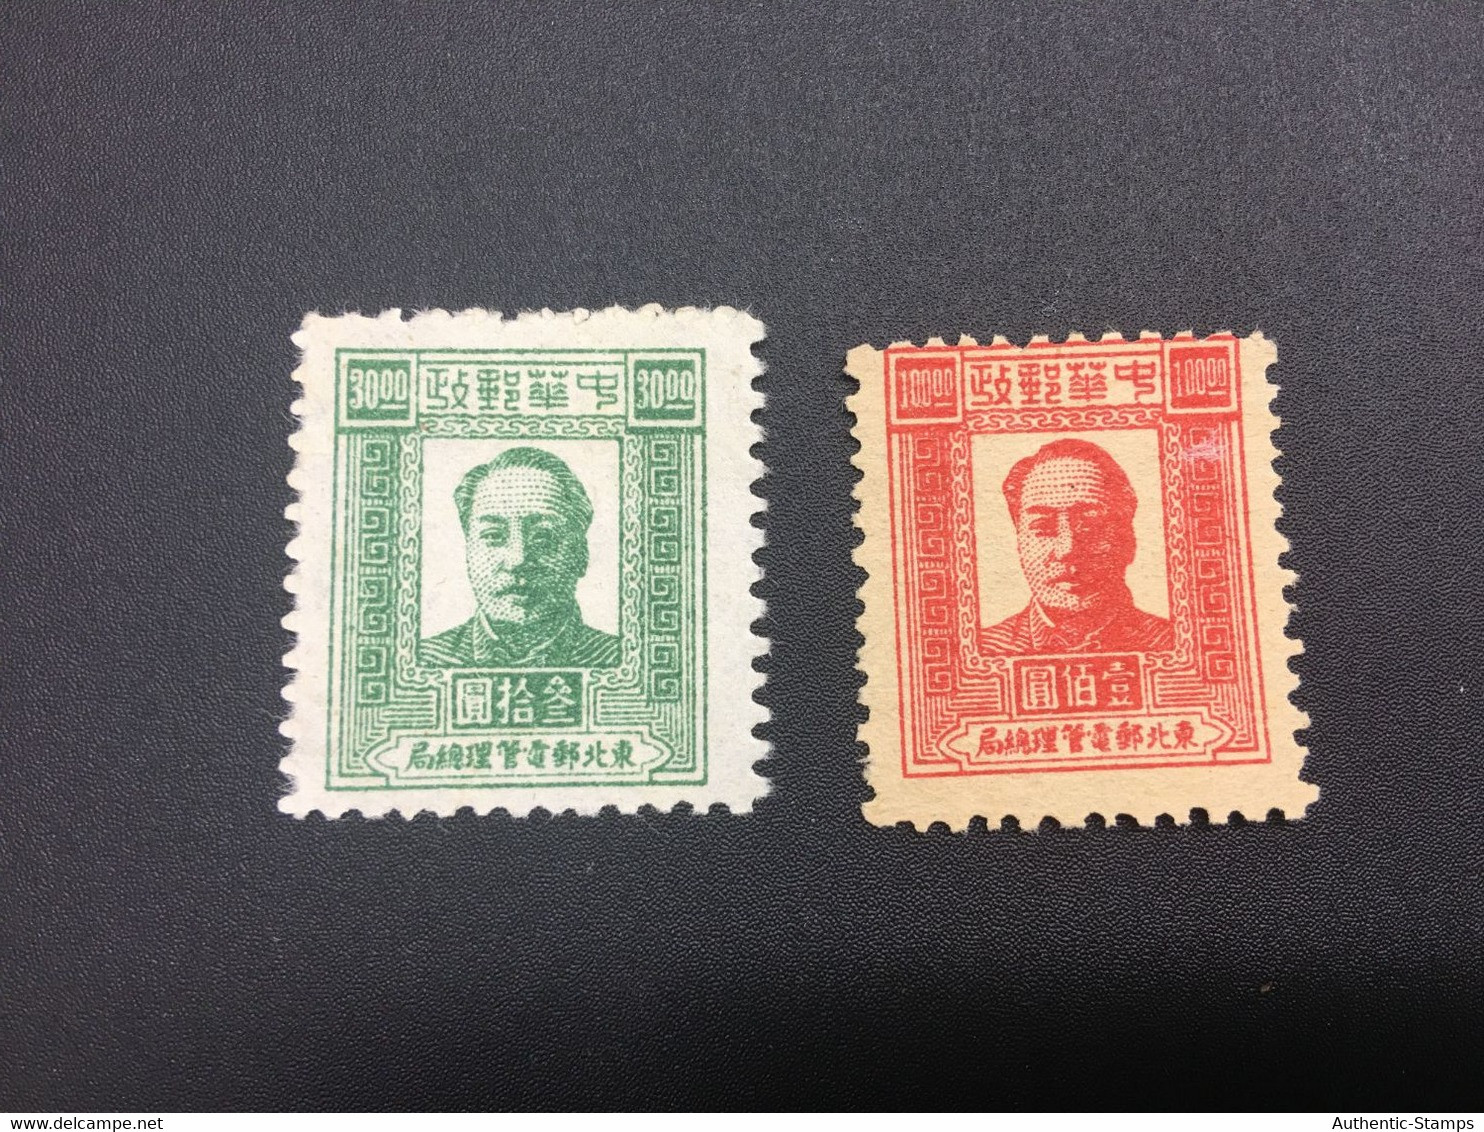 CHINA STAMP,  UNUSED, TIMBRO, STEMPEL,  CINA, CHINE, LIST 7377 - Chine Du Nord-Est 1946-48